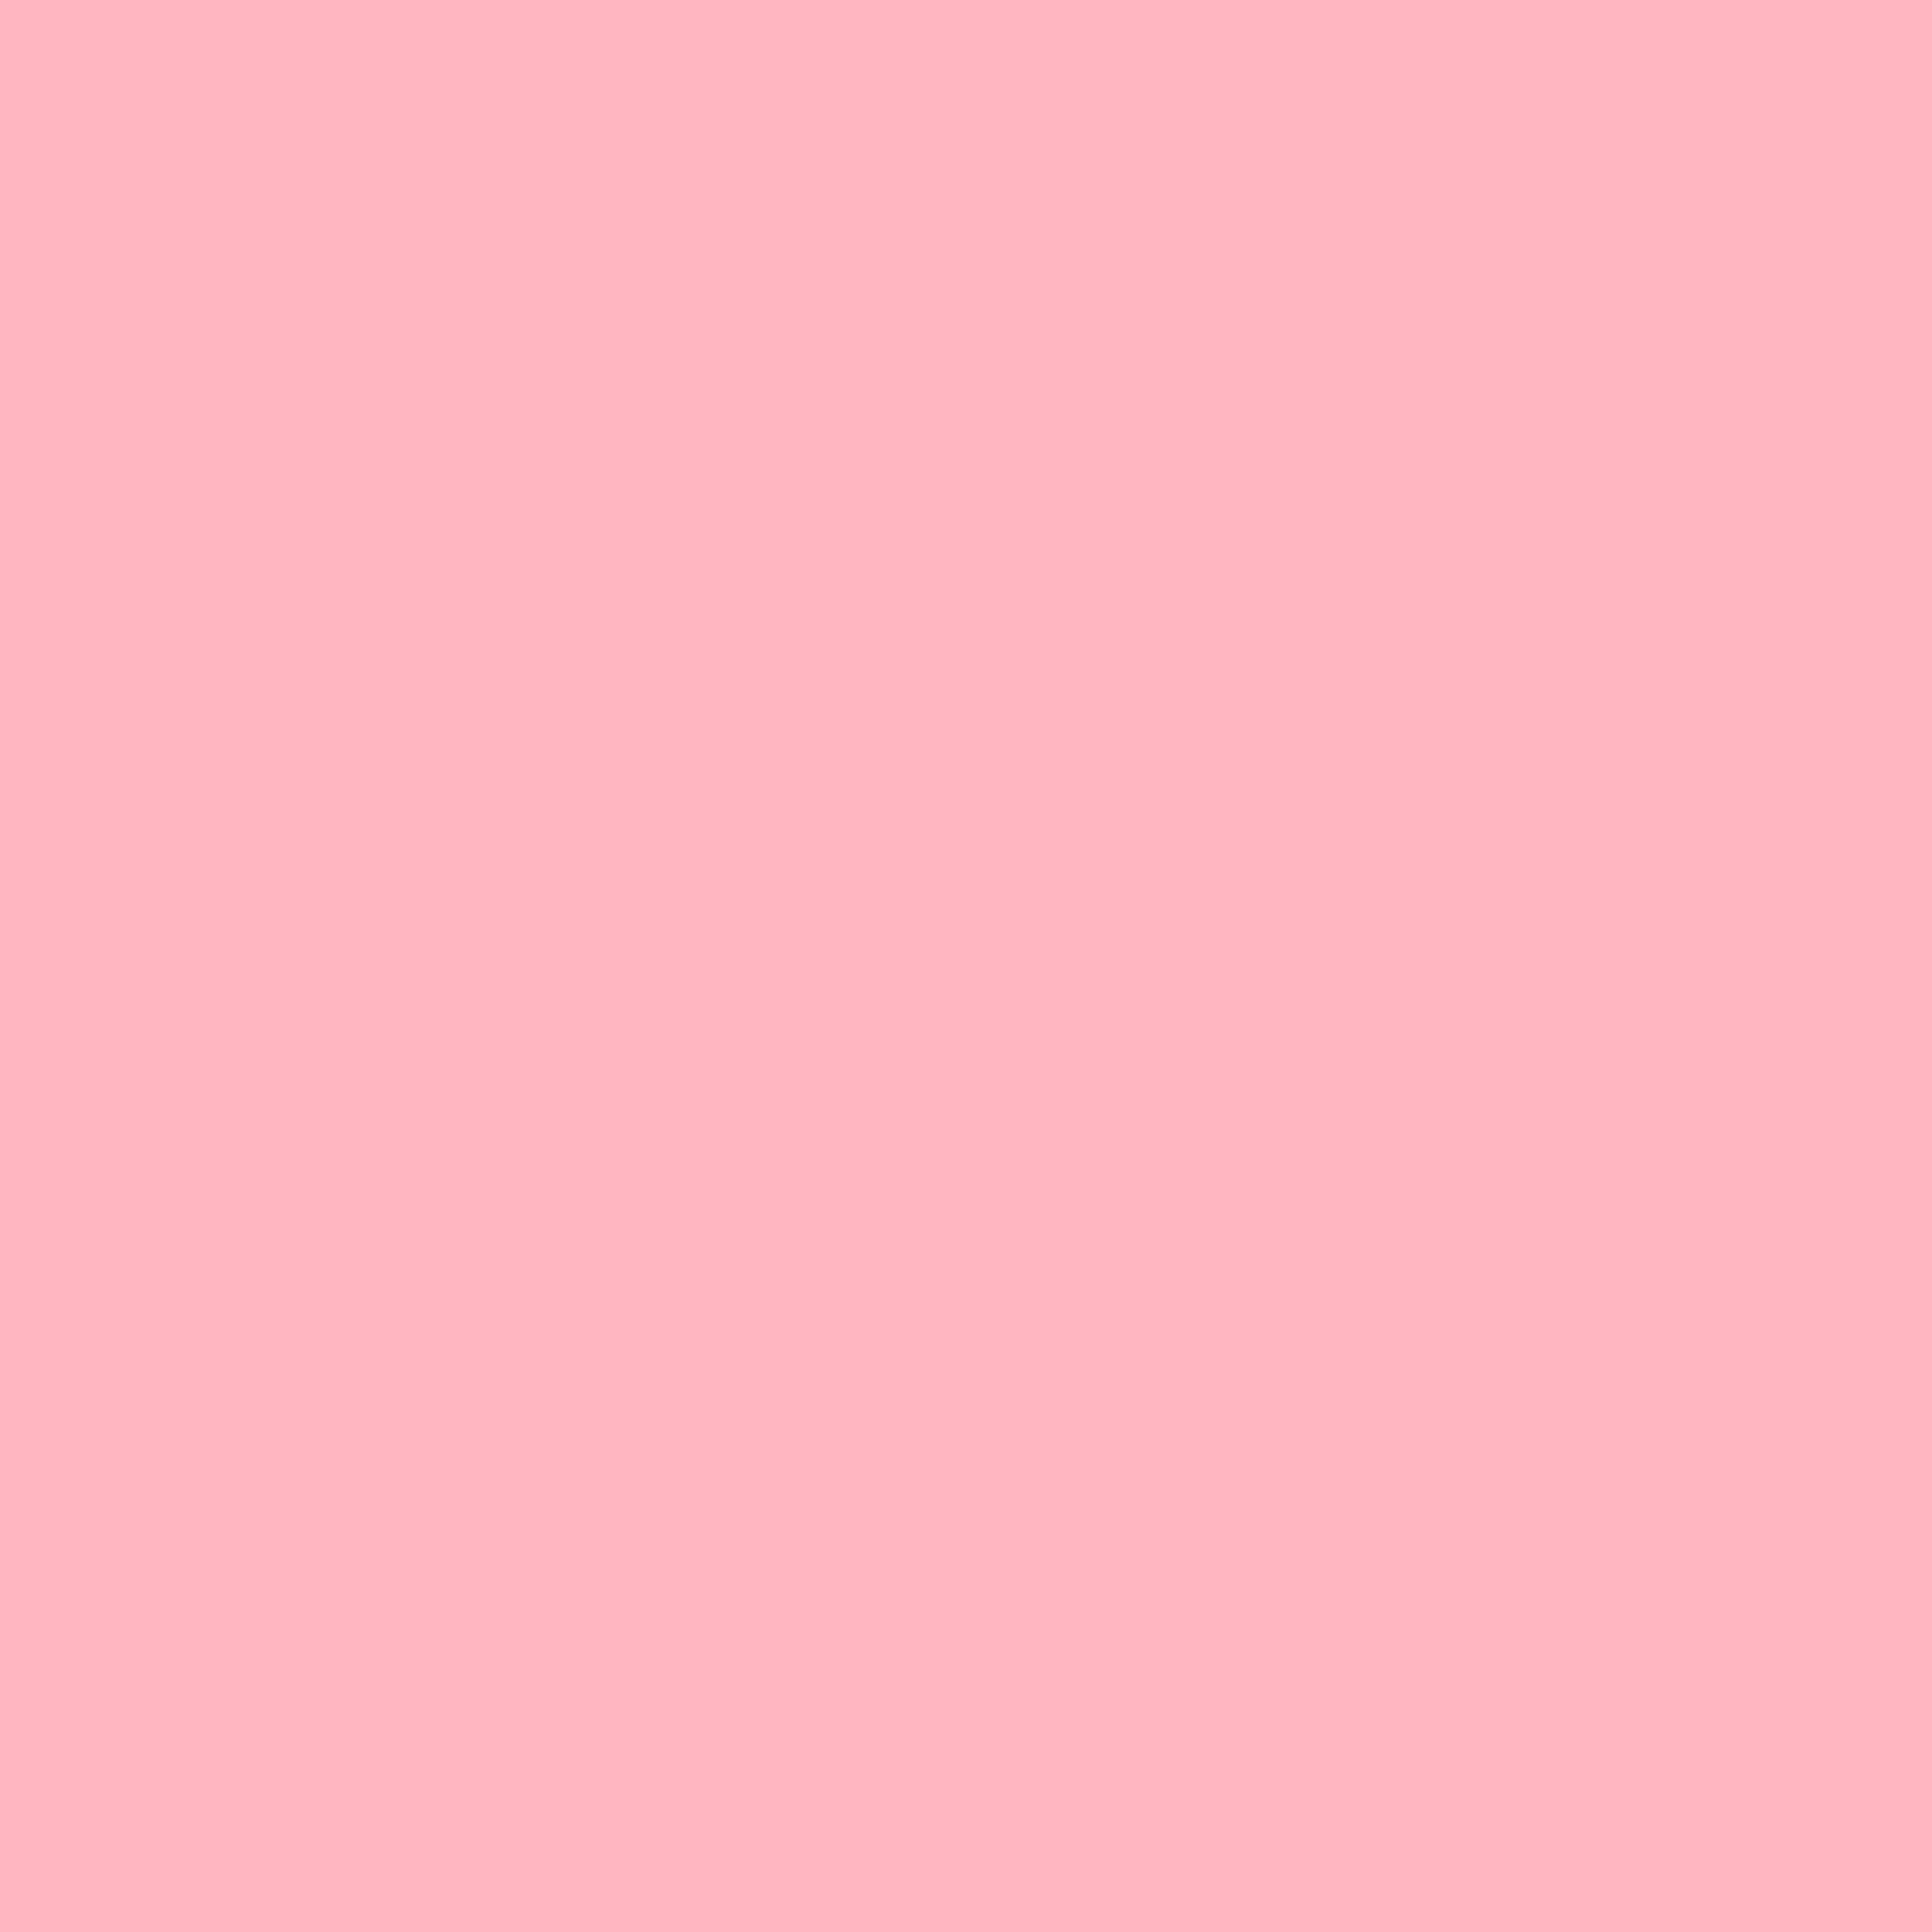 Simple Light Pink Background image gallery